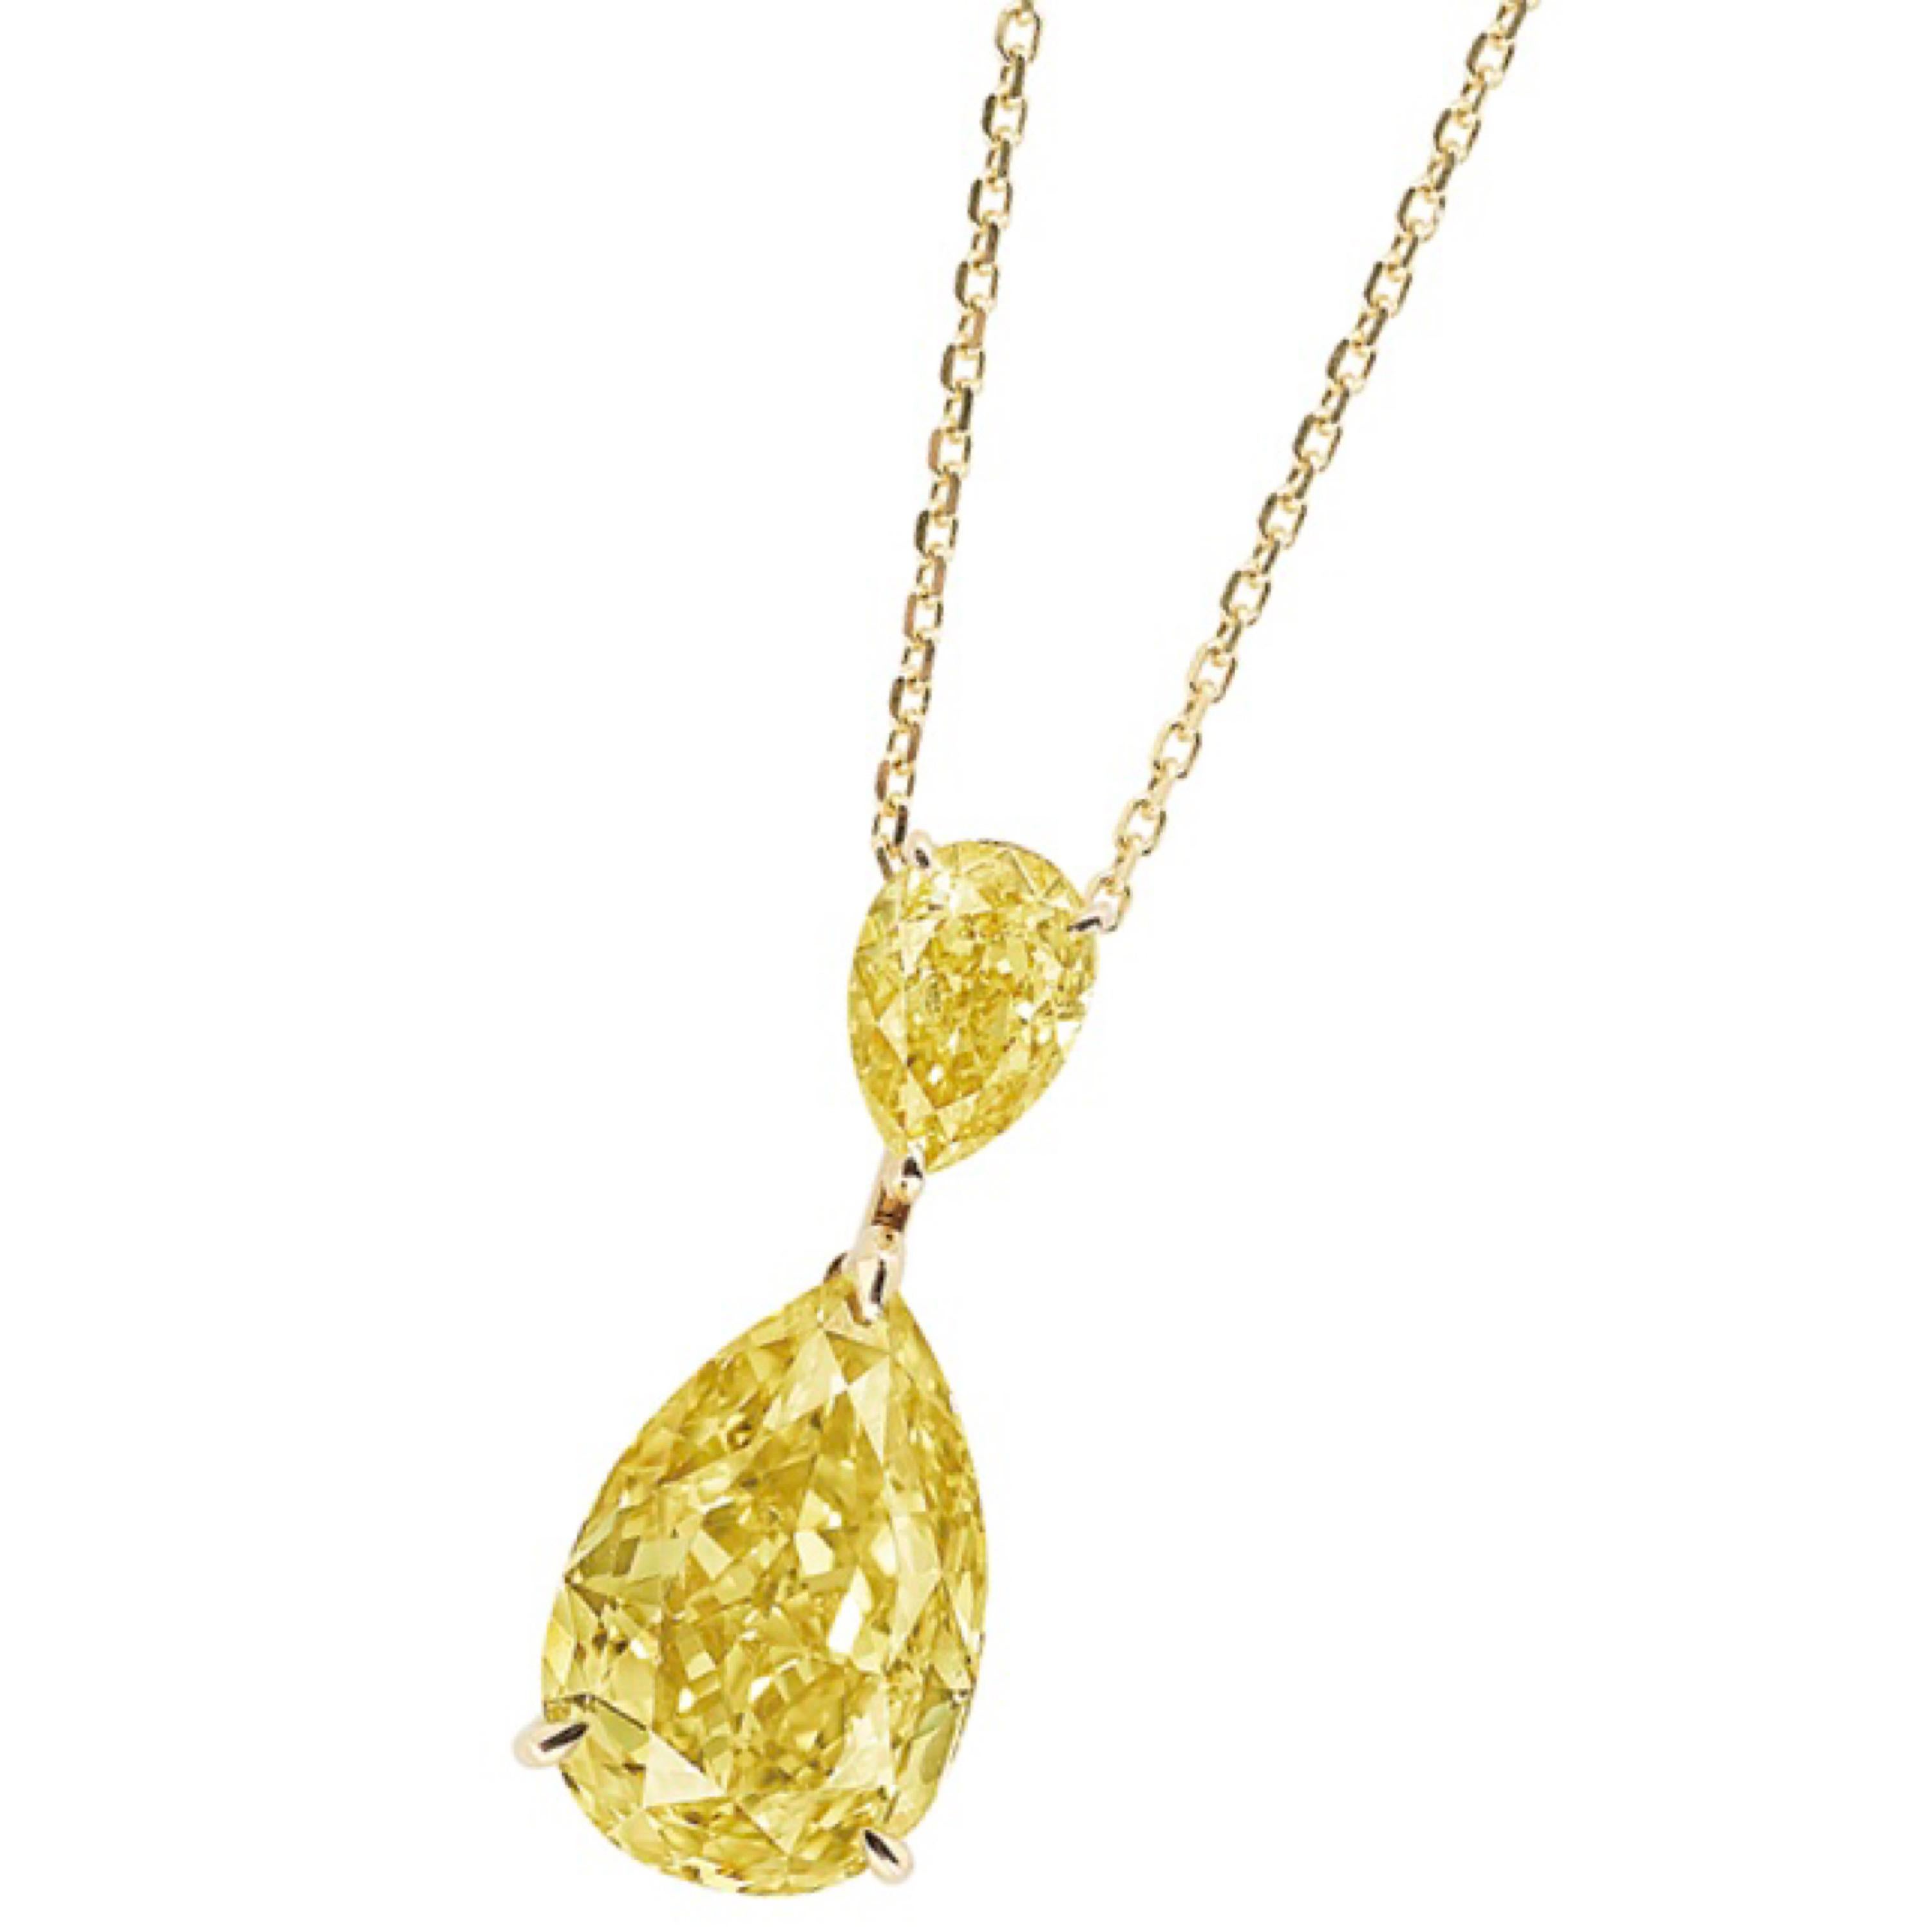 From the Emilio Jewelry Museum Vault, We are Showcasing a stunning 5.00 carat pear shape Gia certified diamond. Natural fancy yellow diamonds are rare and this one is indeed a Fancy Deep which means it is the most rich and saturated yellow on the